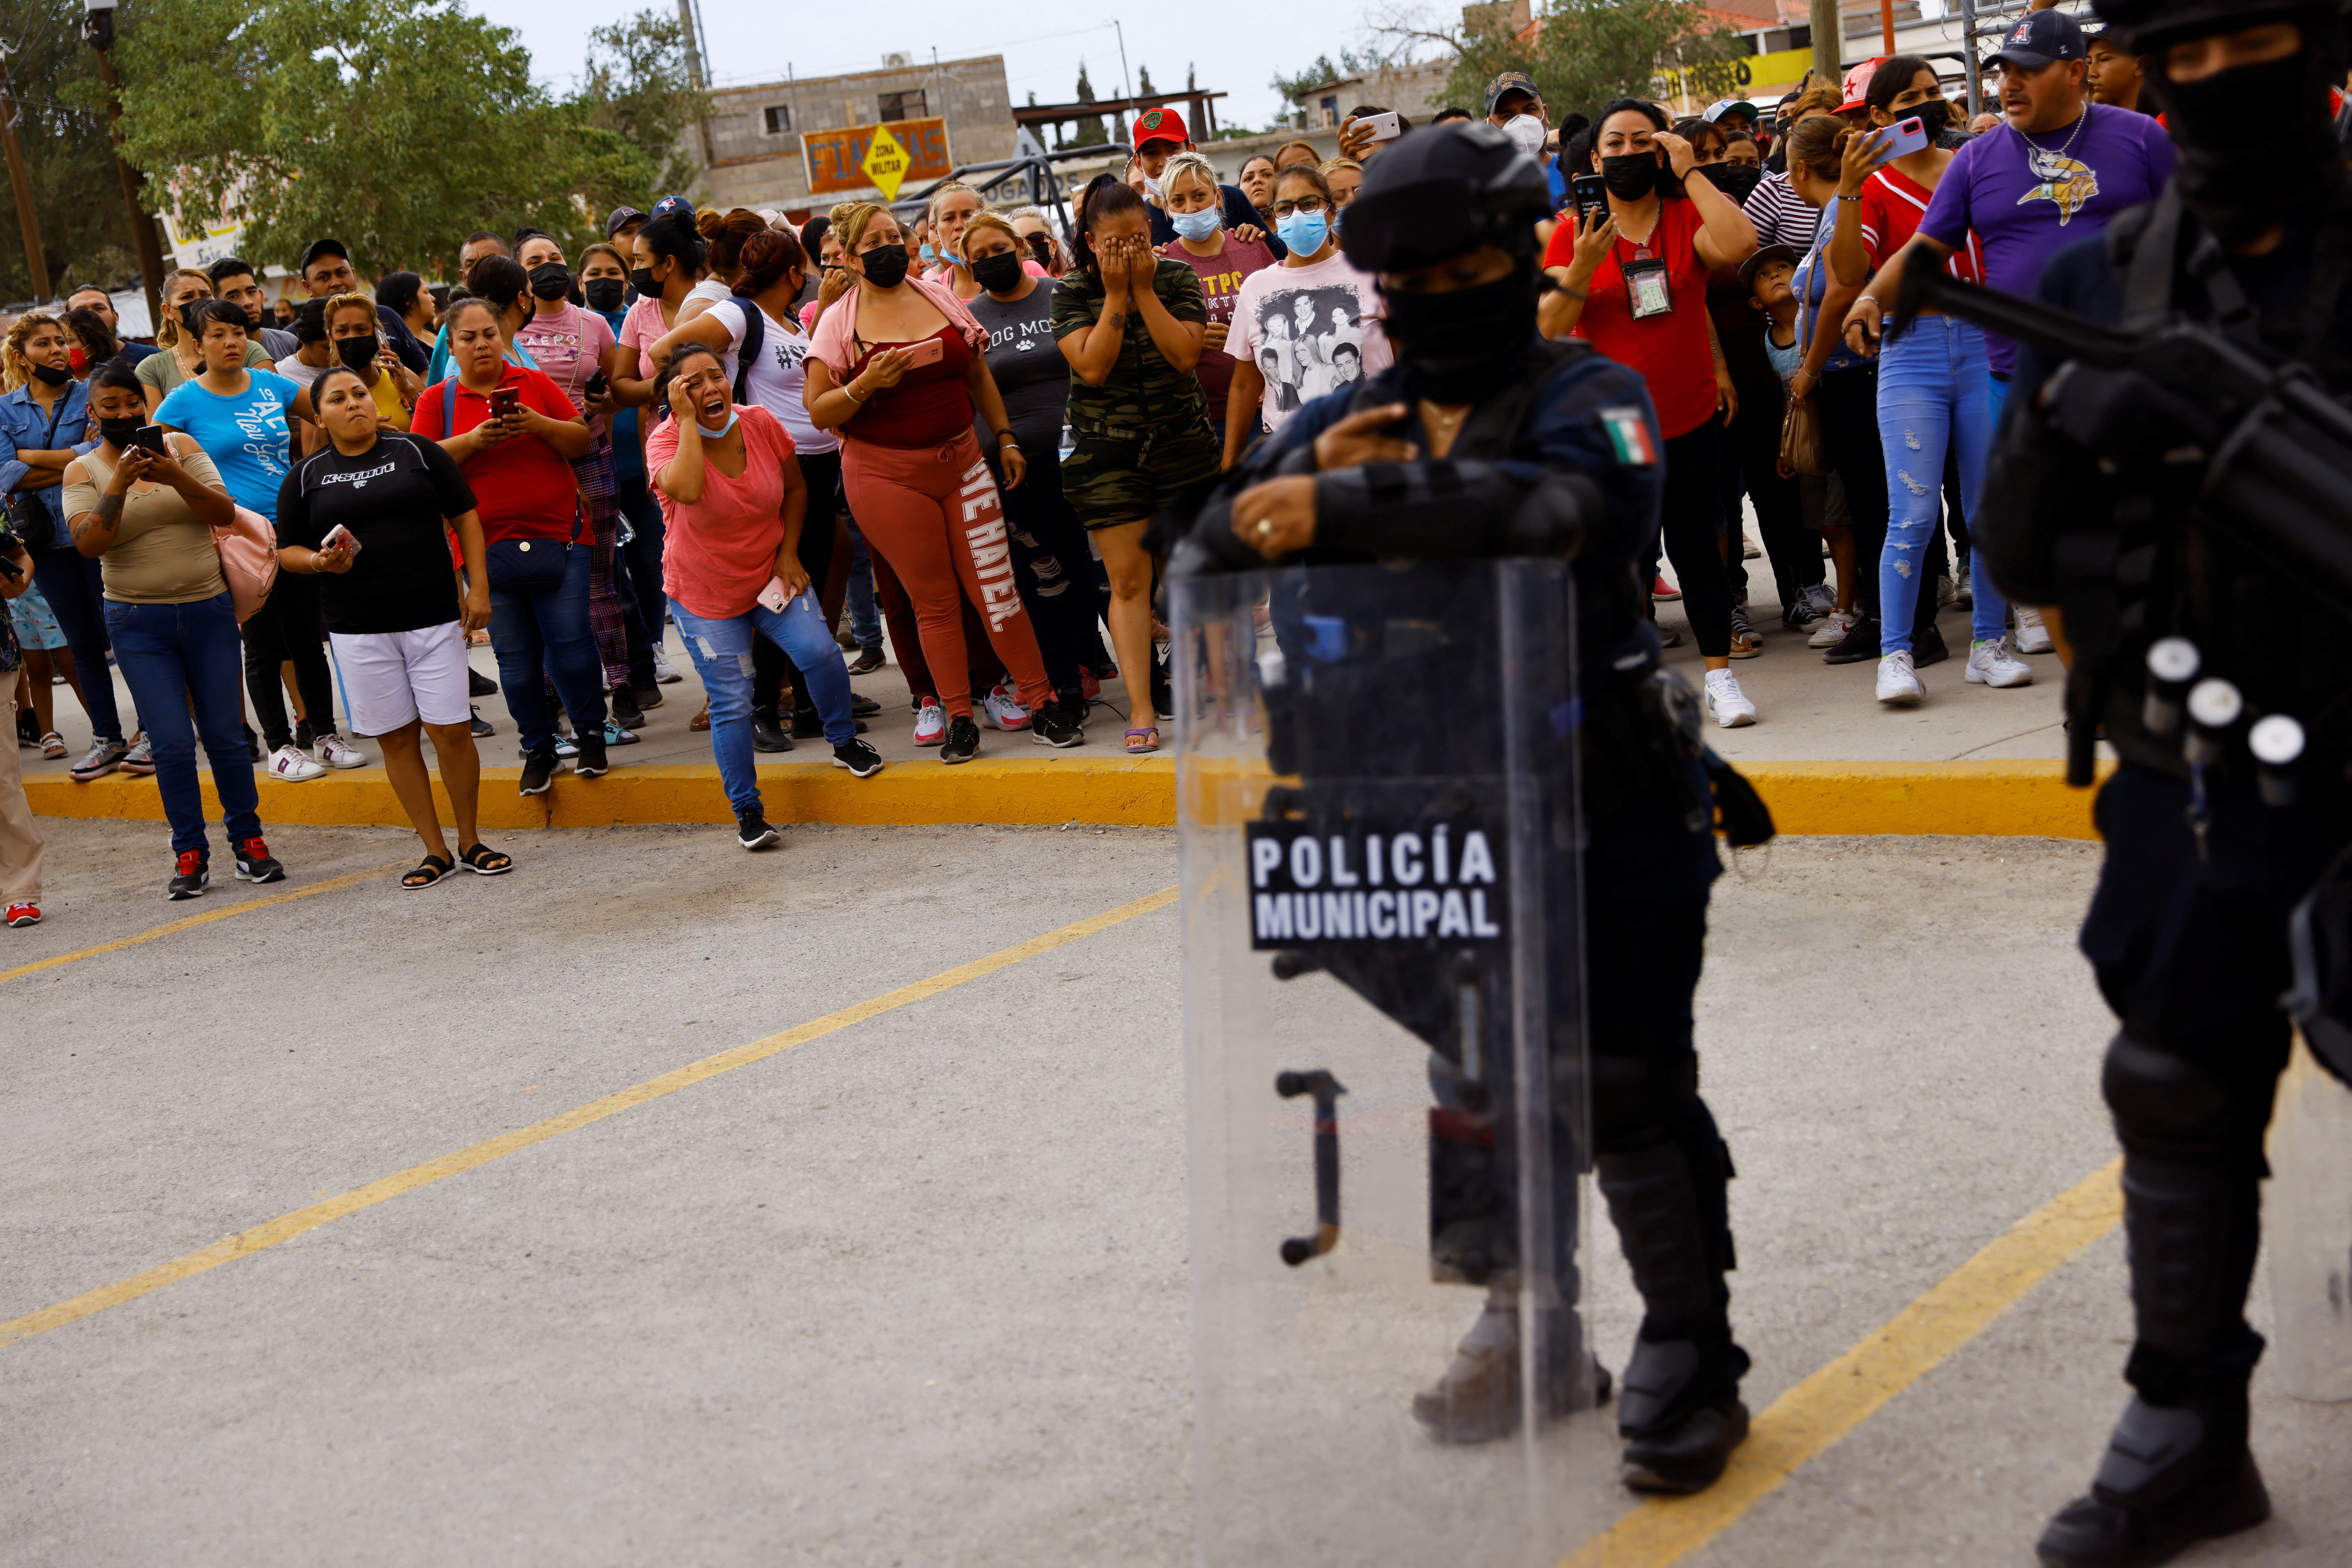 They will release 2 detainees due to the wave of violence in Ciudad Juárez, no evidence was found linking them to the events (Photo: REUTERS/Jose Luis Gonzalez)